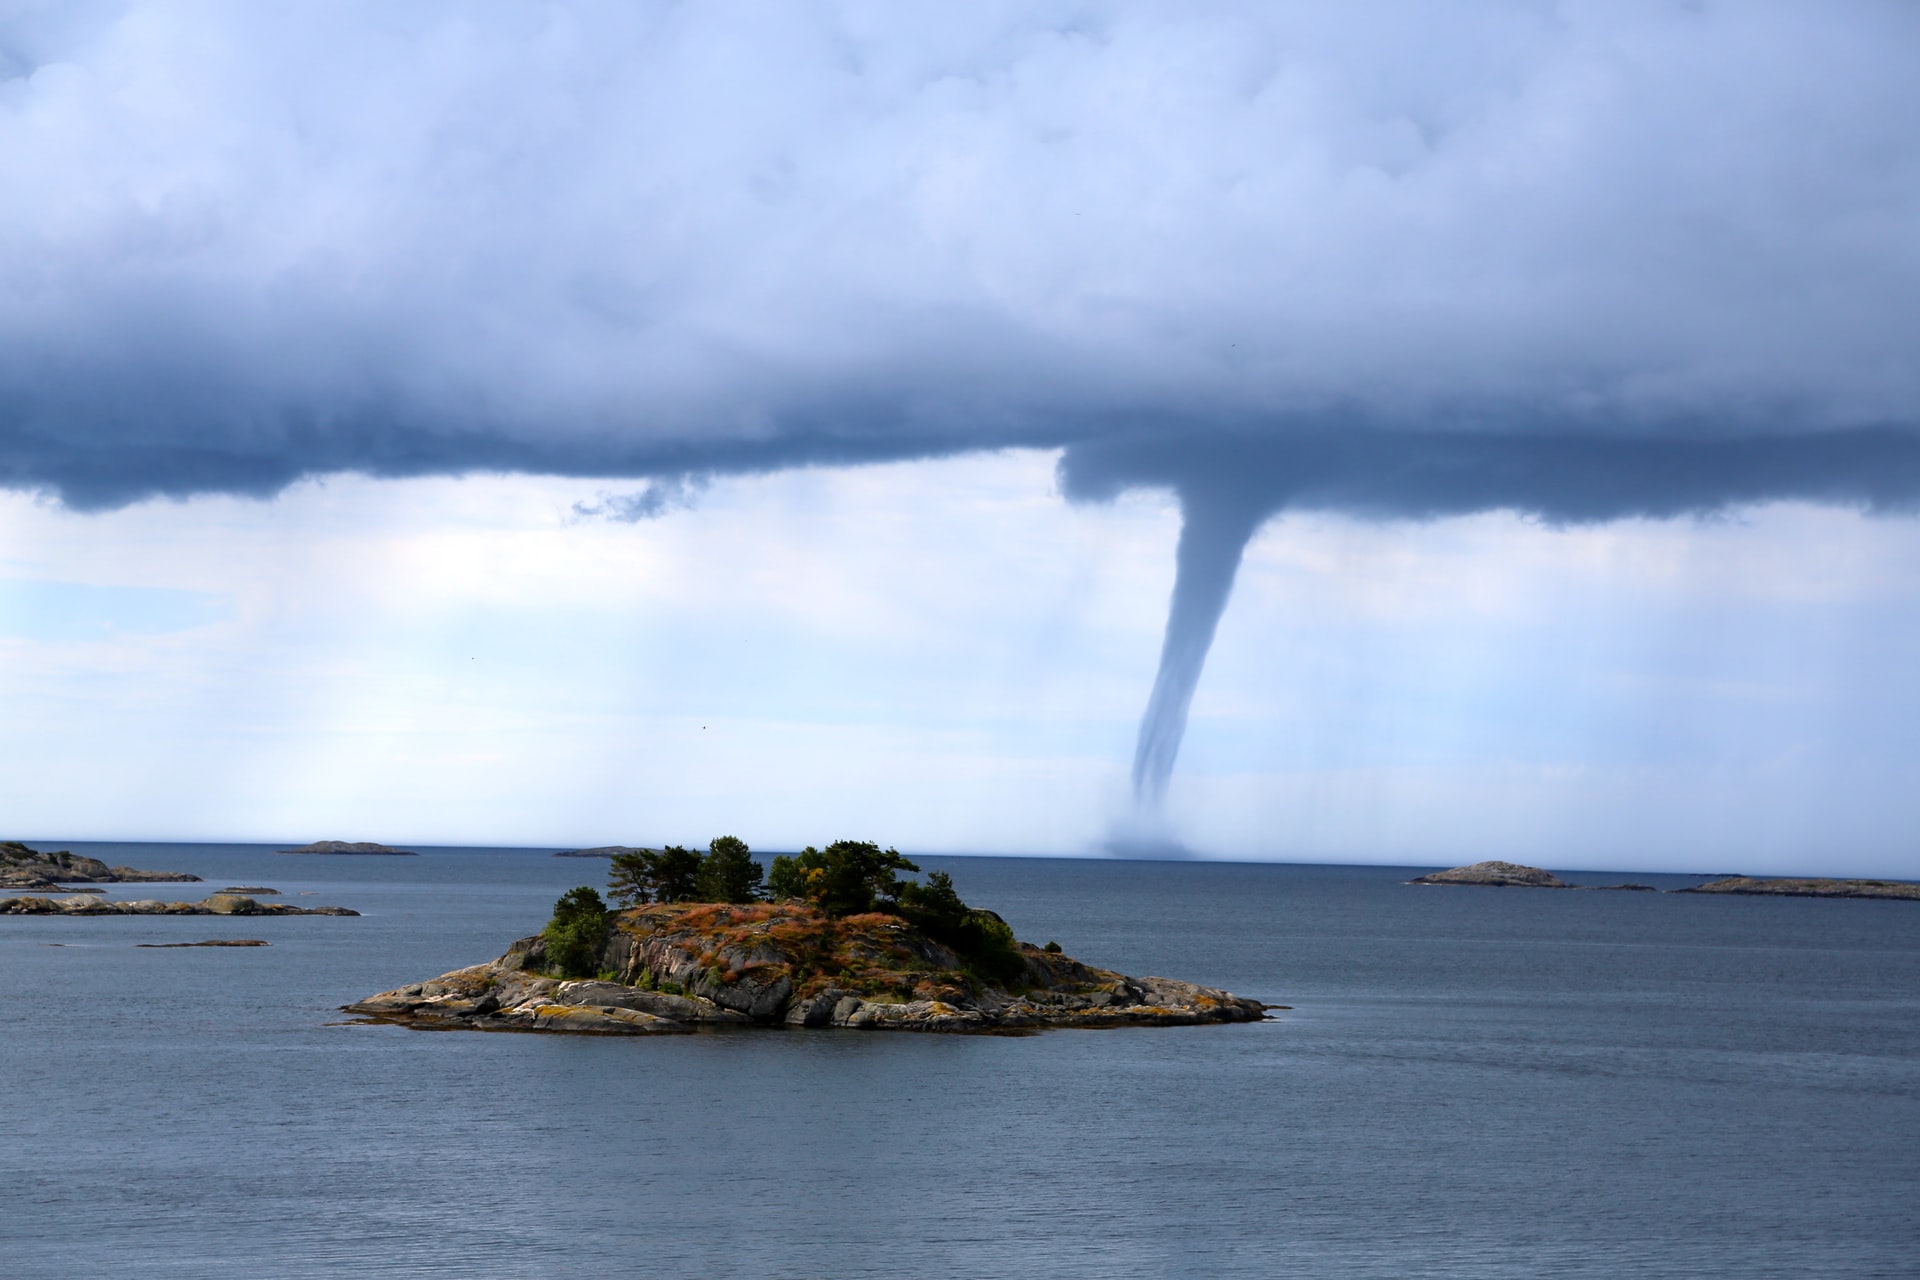 A photo of a tornado getting near a small island covered with trees